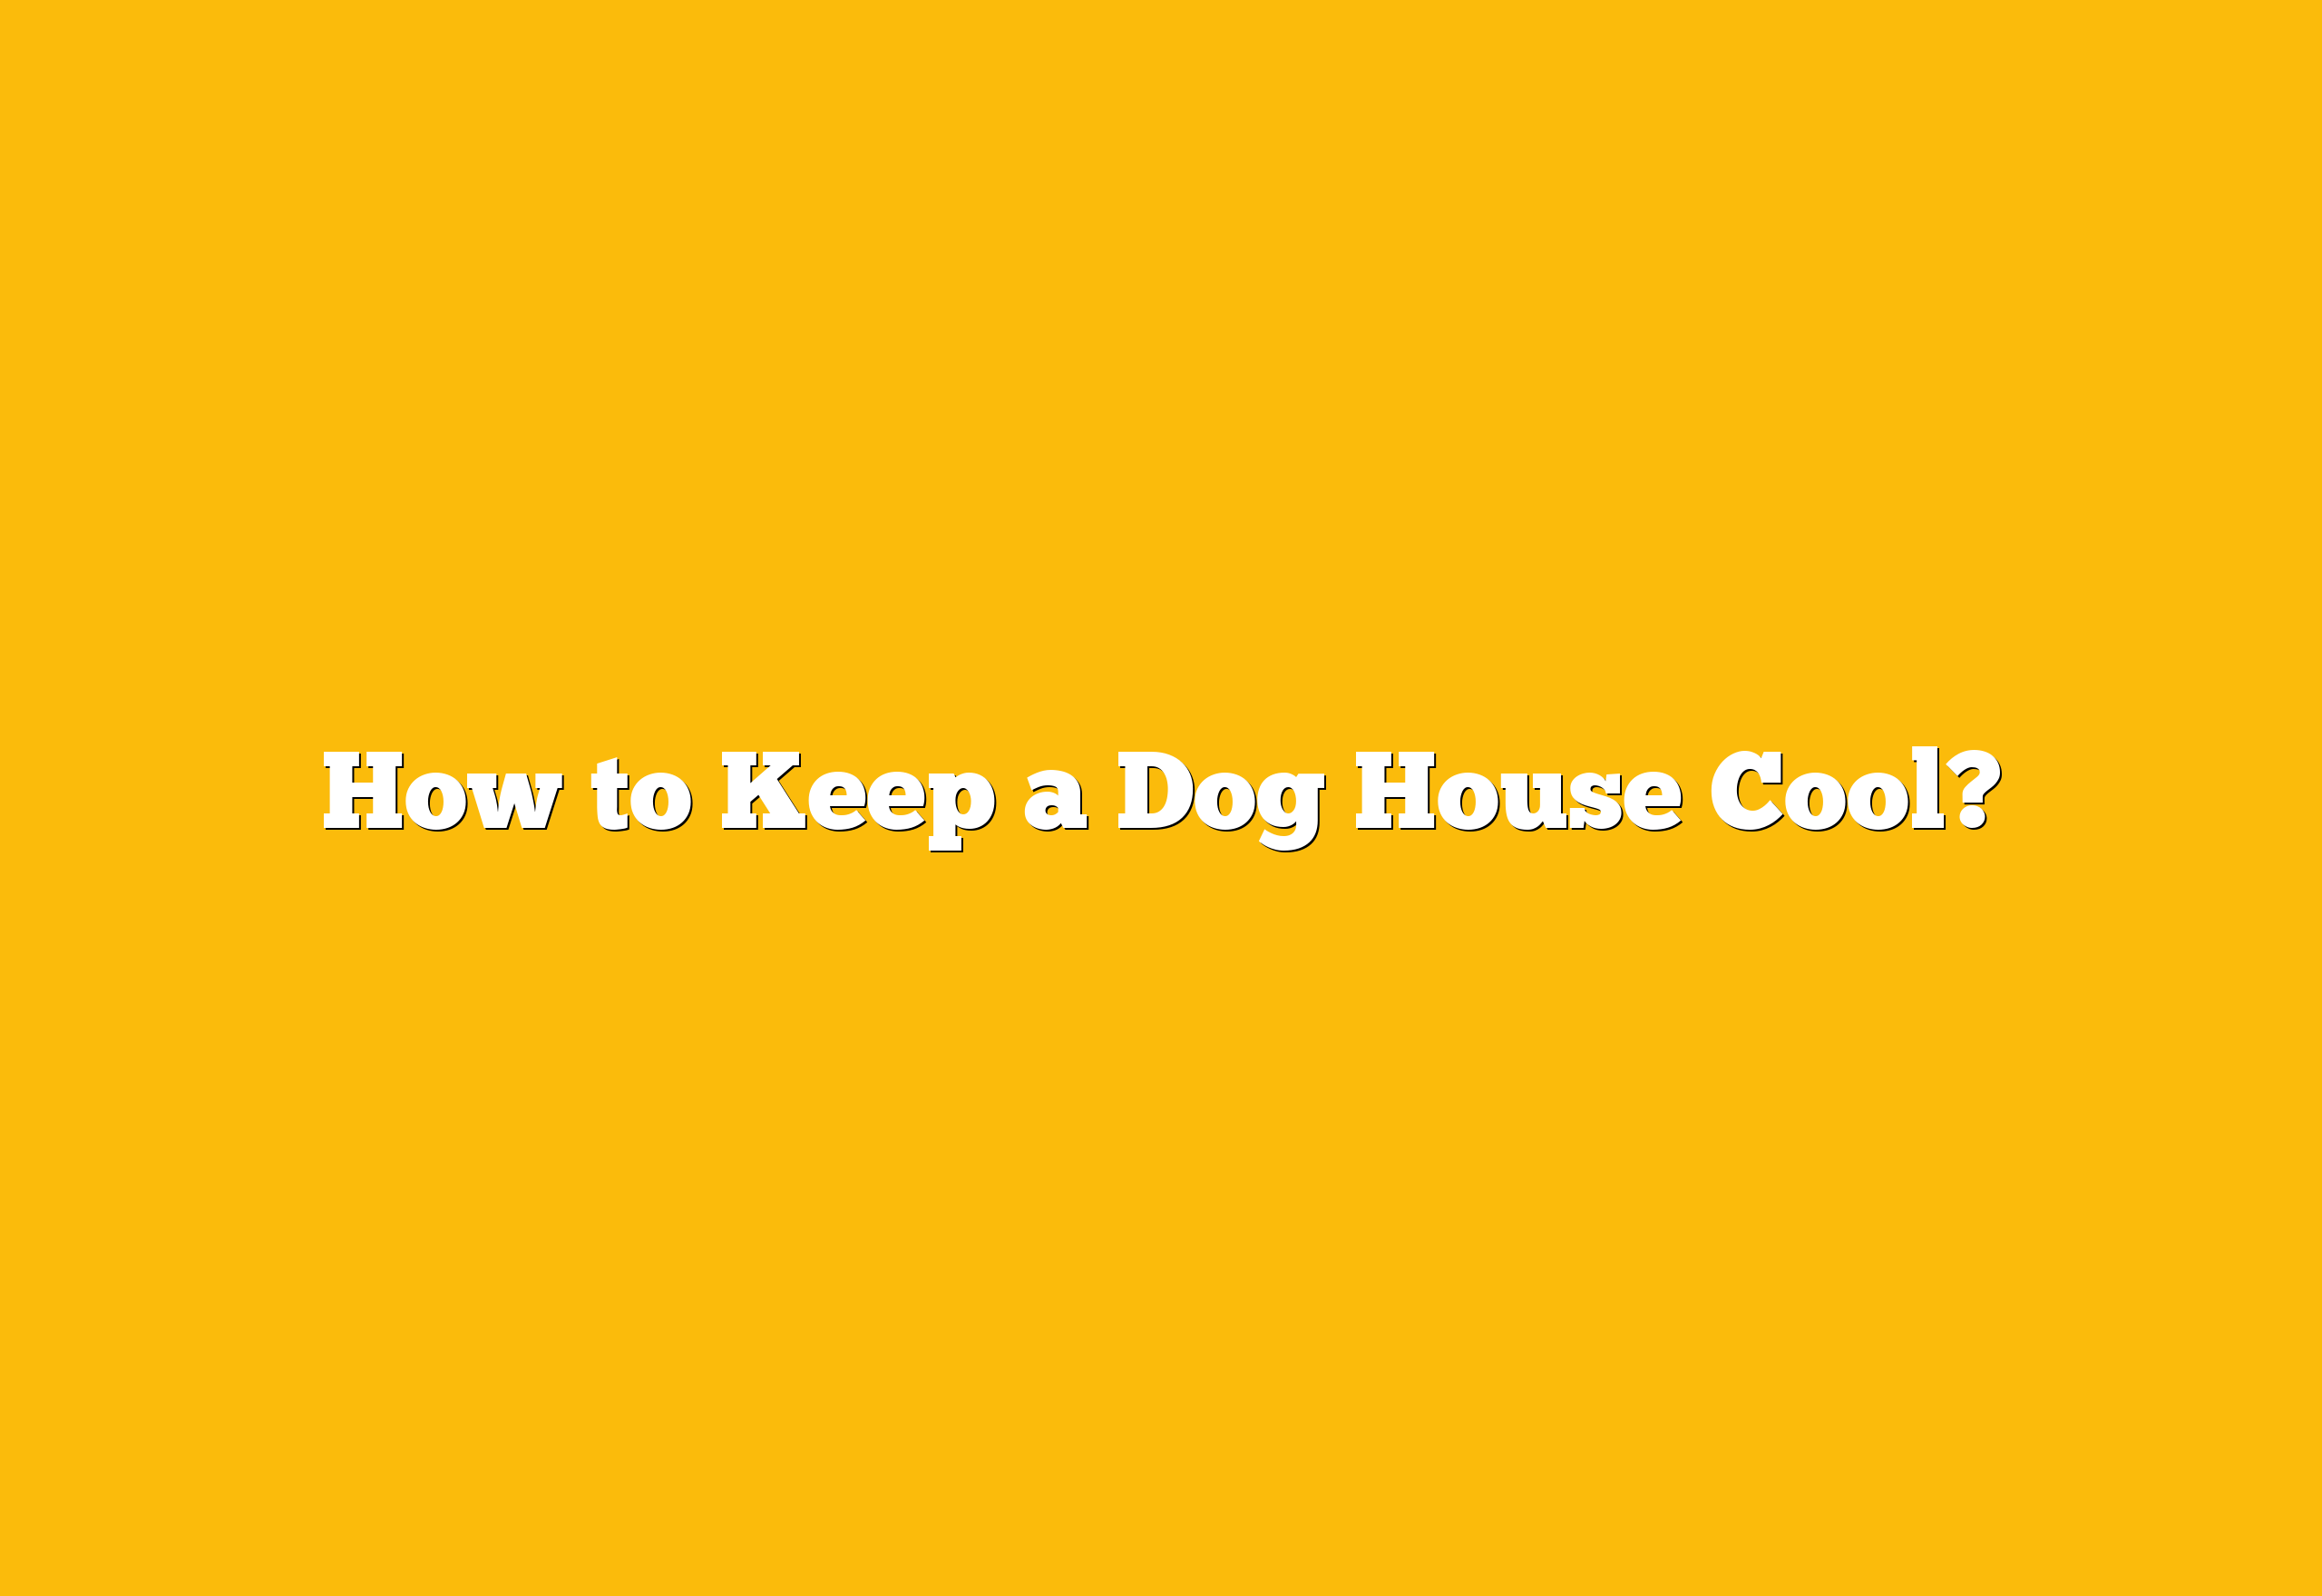 How to Keep a Dog House Cool?